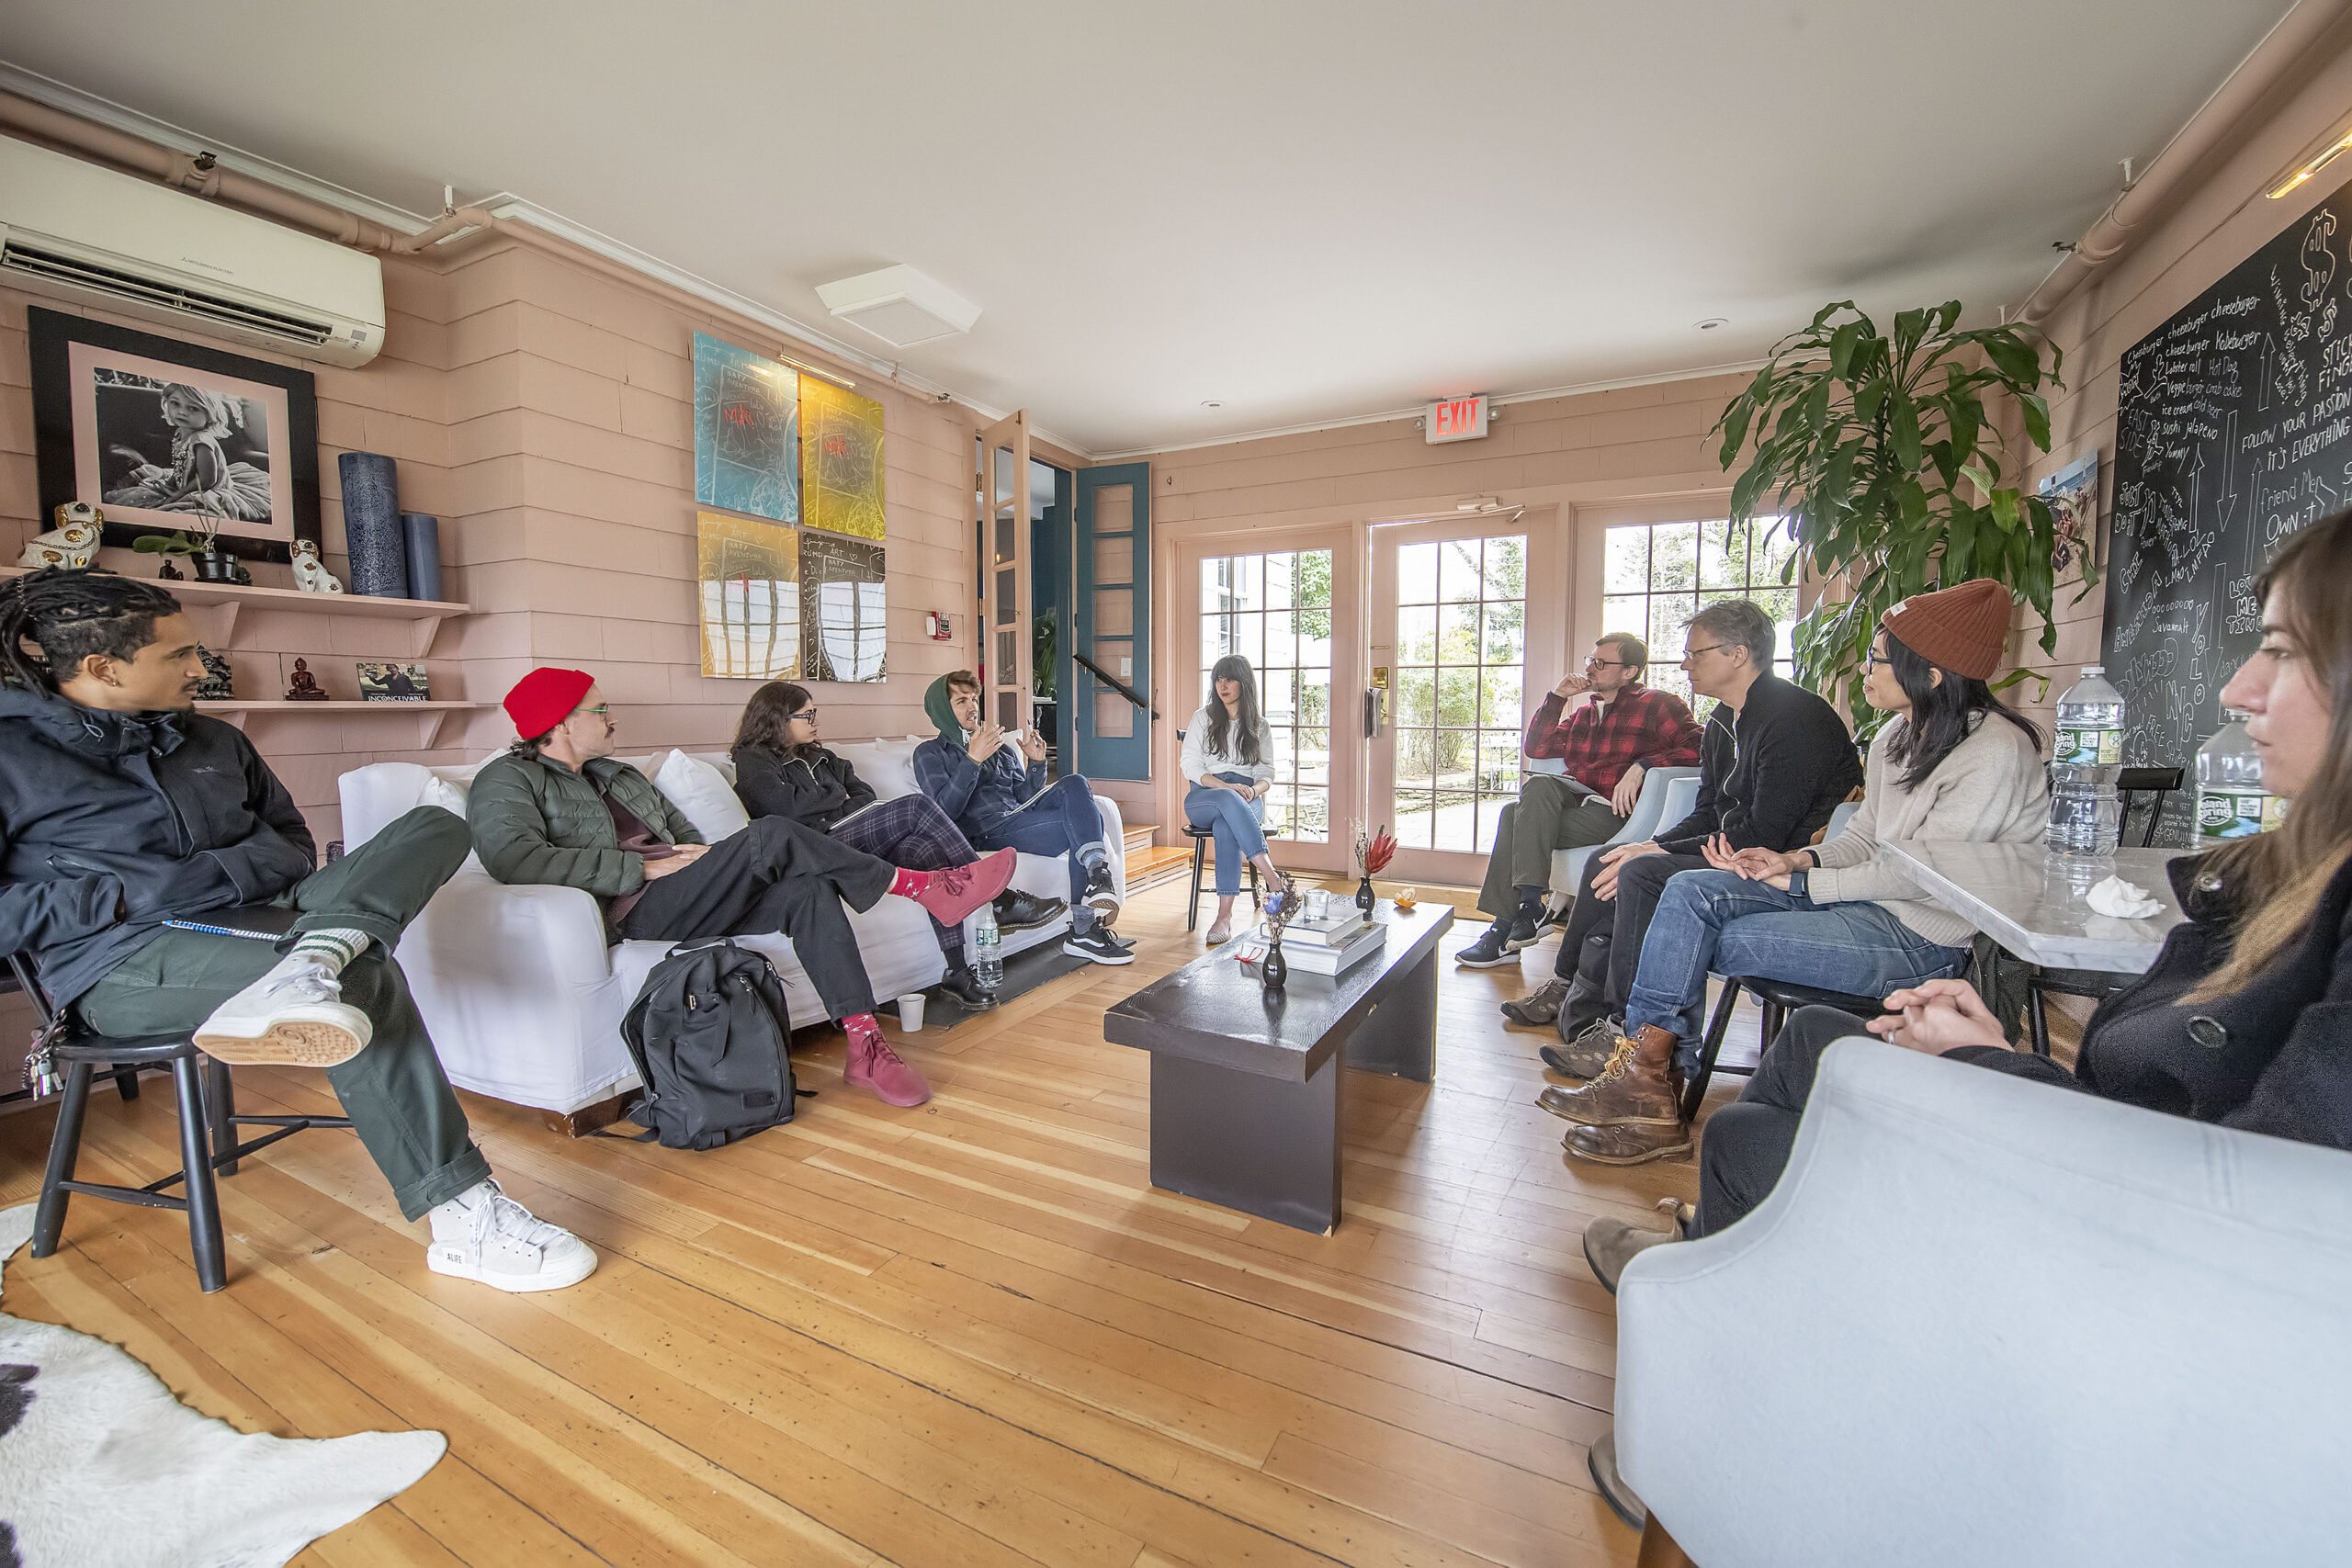 The HamptonsFilm Screenwriters Lab, pairing three award-winning filmmakers with four young screenwriters, was held at the Maidstone Inn in East Hampton from April 8 to 10, 2022. MICHAEL HELLER